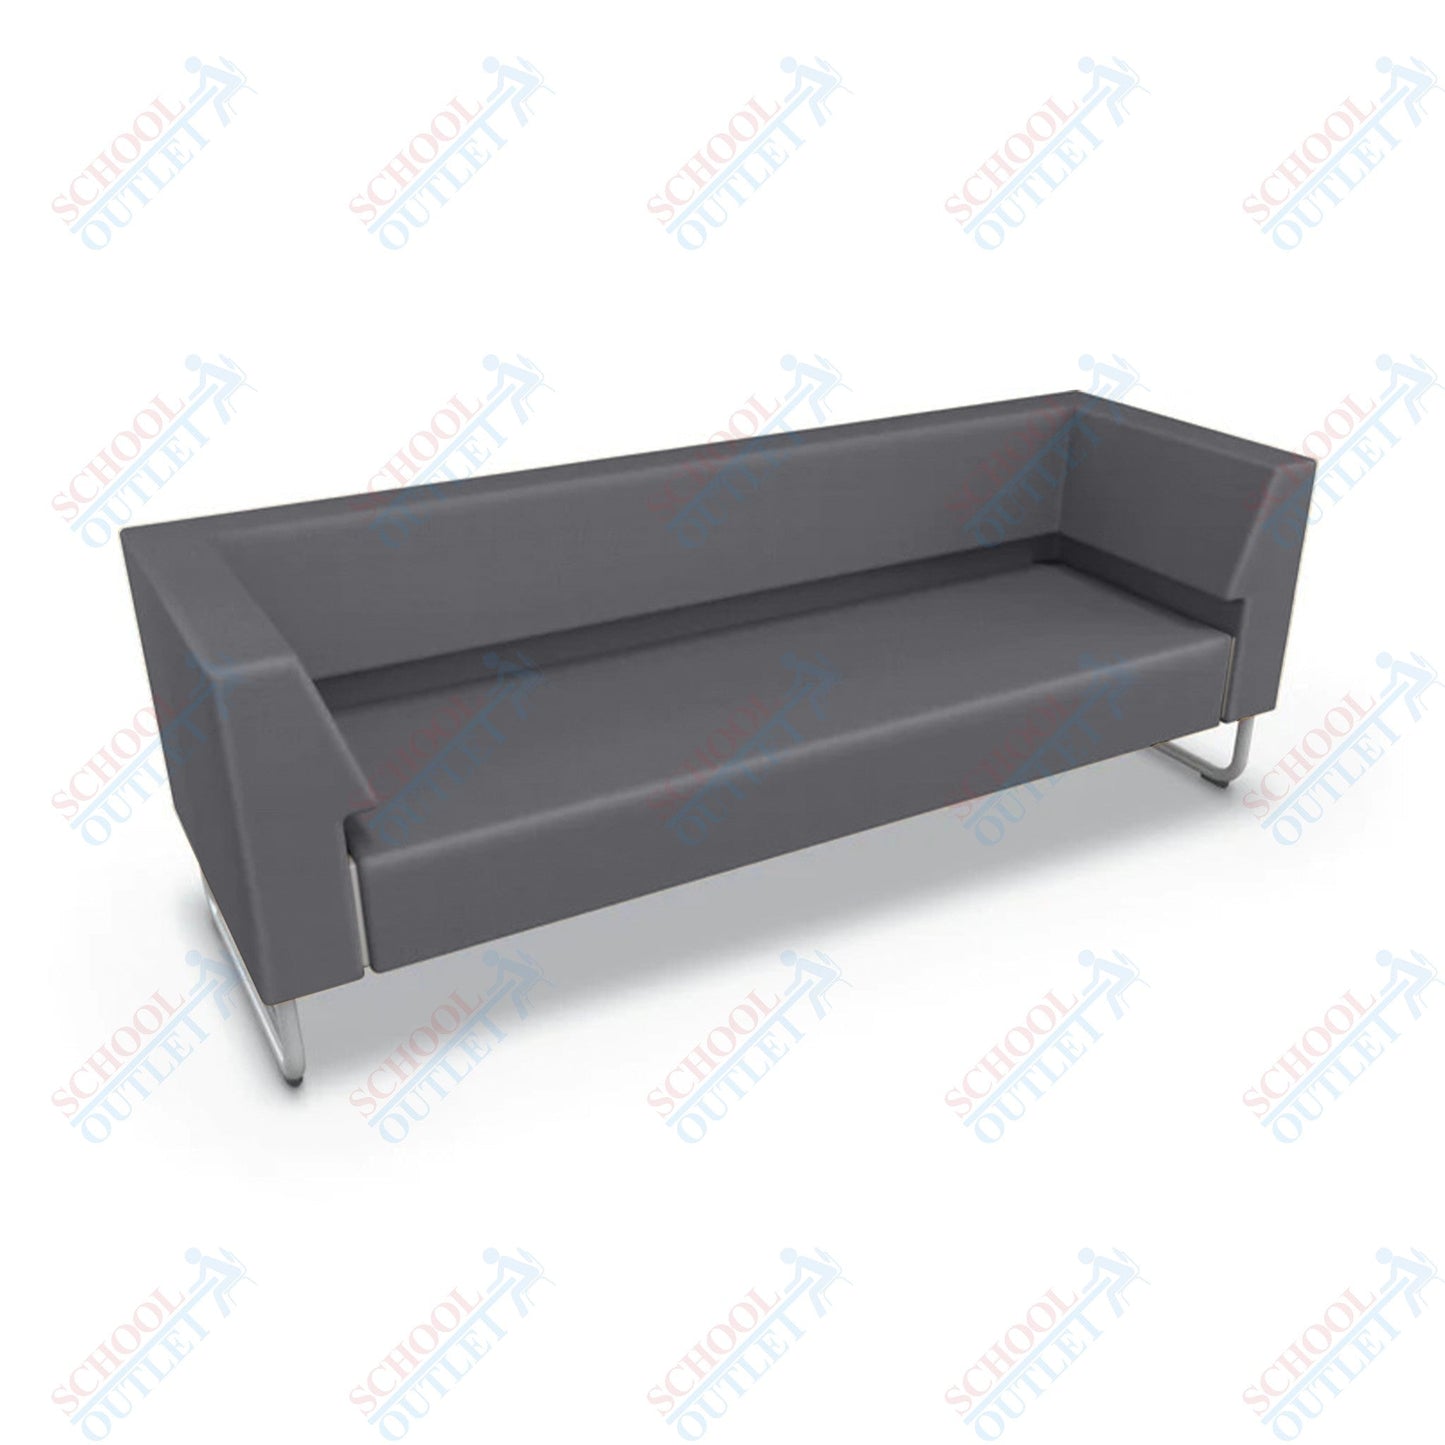 Mooreco Akt Soft Seating Lounge Sofa - Armless - Grade 02 Fabric and Powder Coated Sled Legs - SchoolOutlet